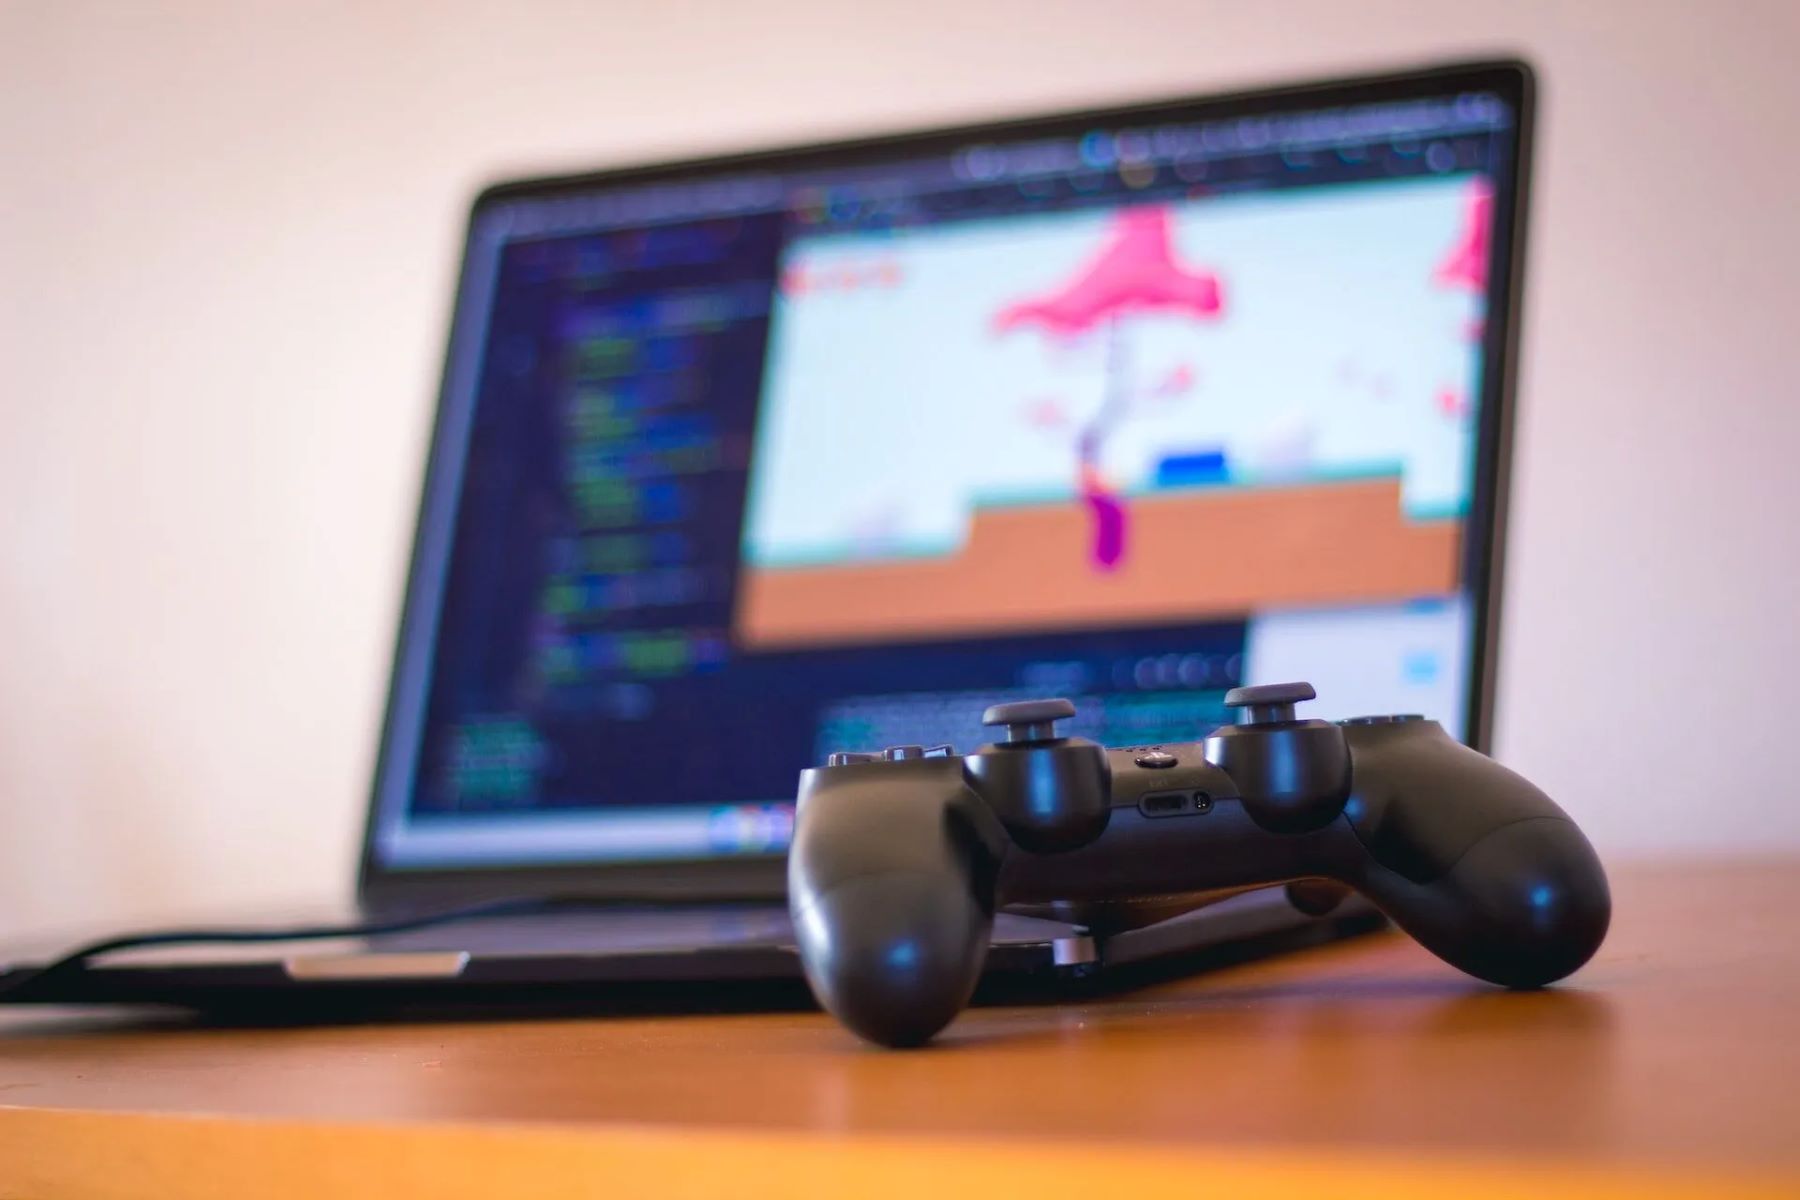 What Online Games Work With A Game Controller